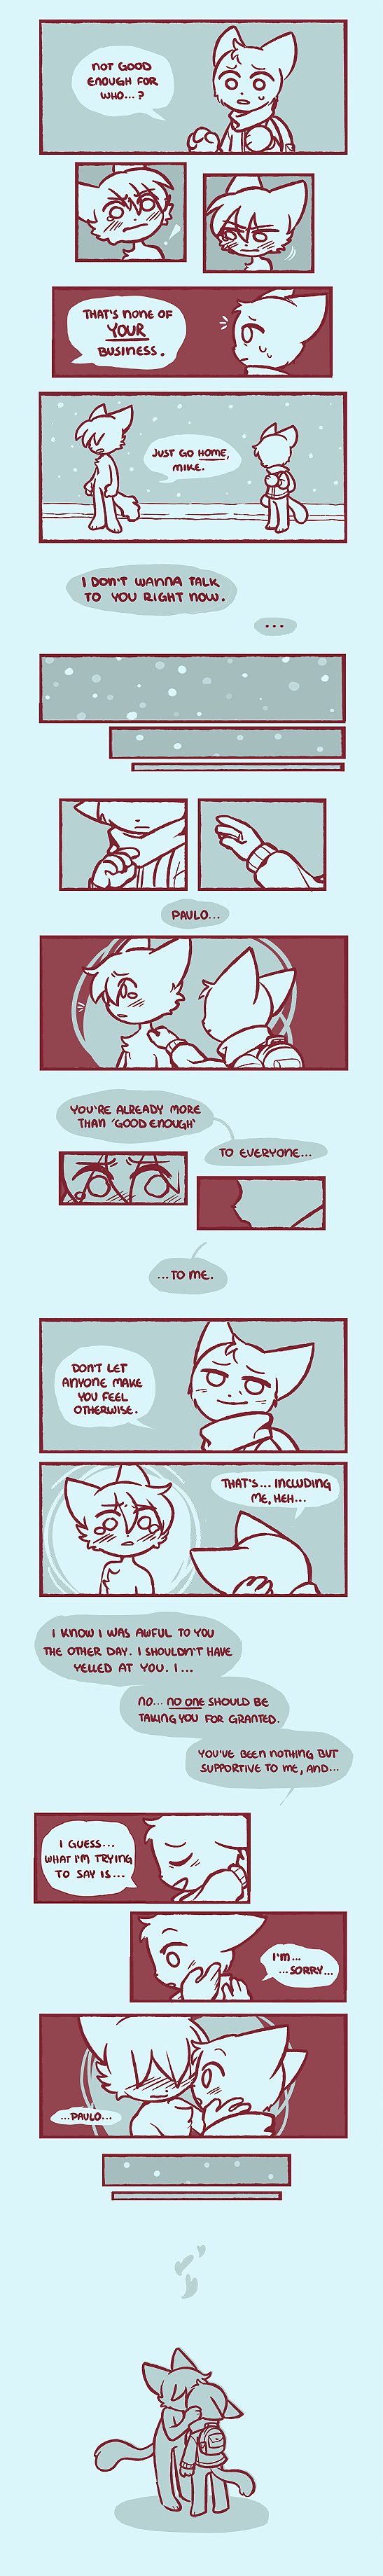 Candybooru image #15414, tagged with Mike MikexPaulo Paulo comic excellent kennolini_(Artist)